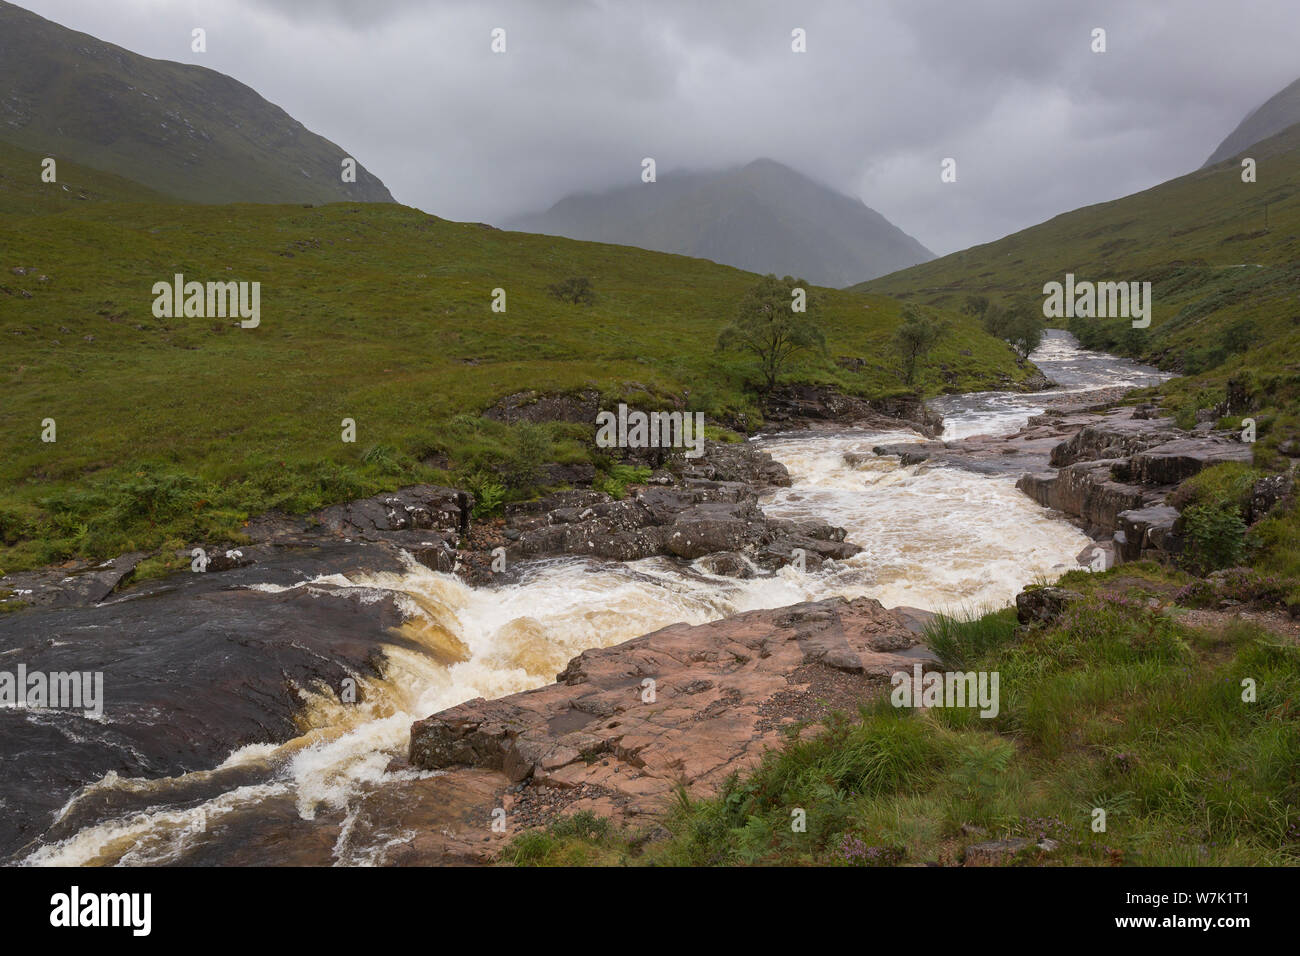 The  River Etive flows through Glen Etive in the Scottish highlands near Glencoe on a moody rainy day with low cloud Stock Photo